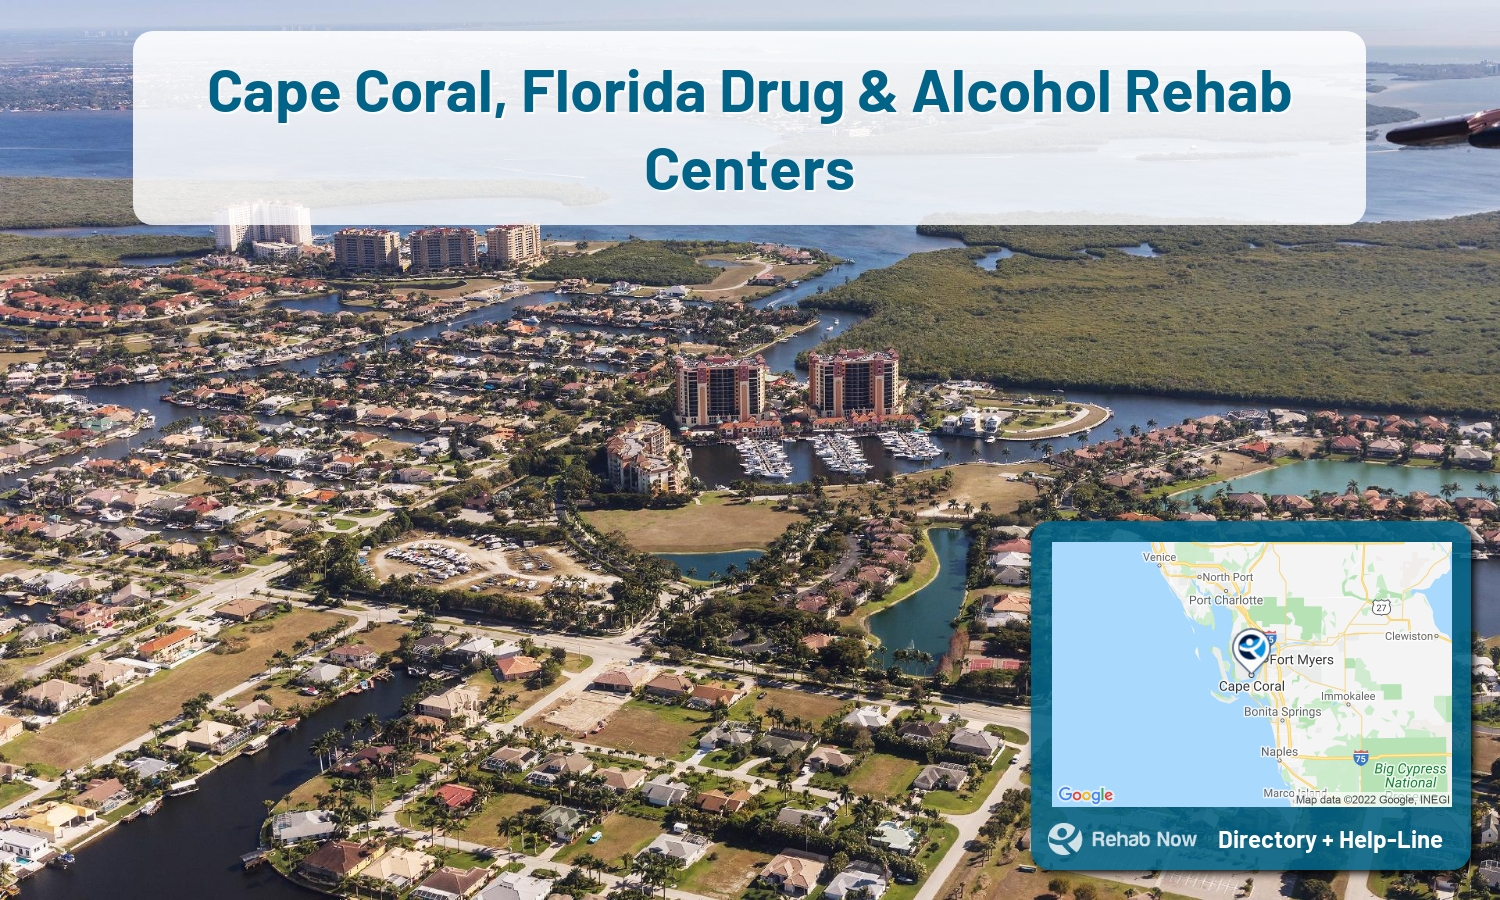 Find drug rehab and alcohol treatment services in Cape Coral. Our experts help you find a center in Cape Coral, Florida